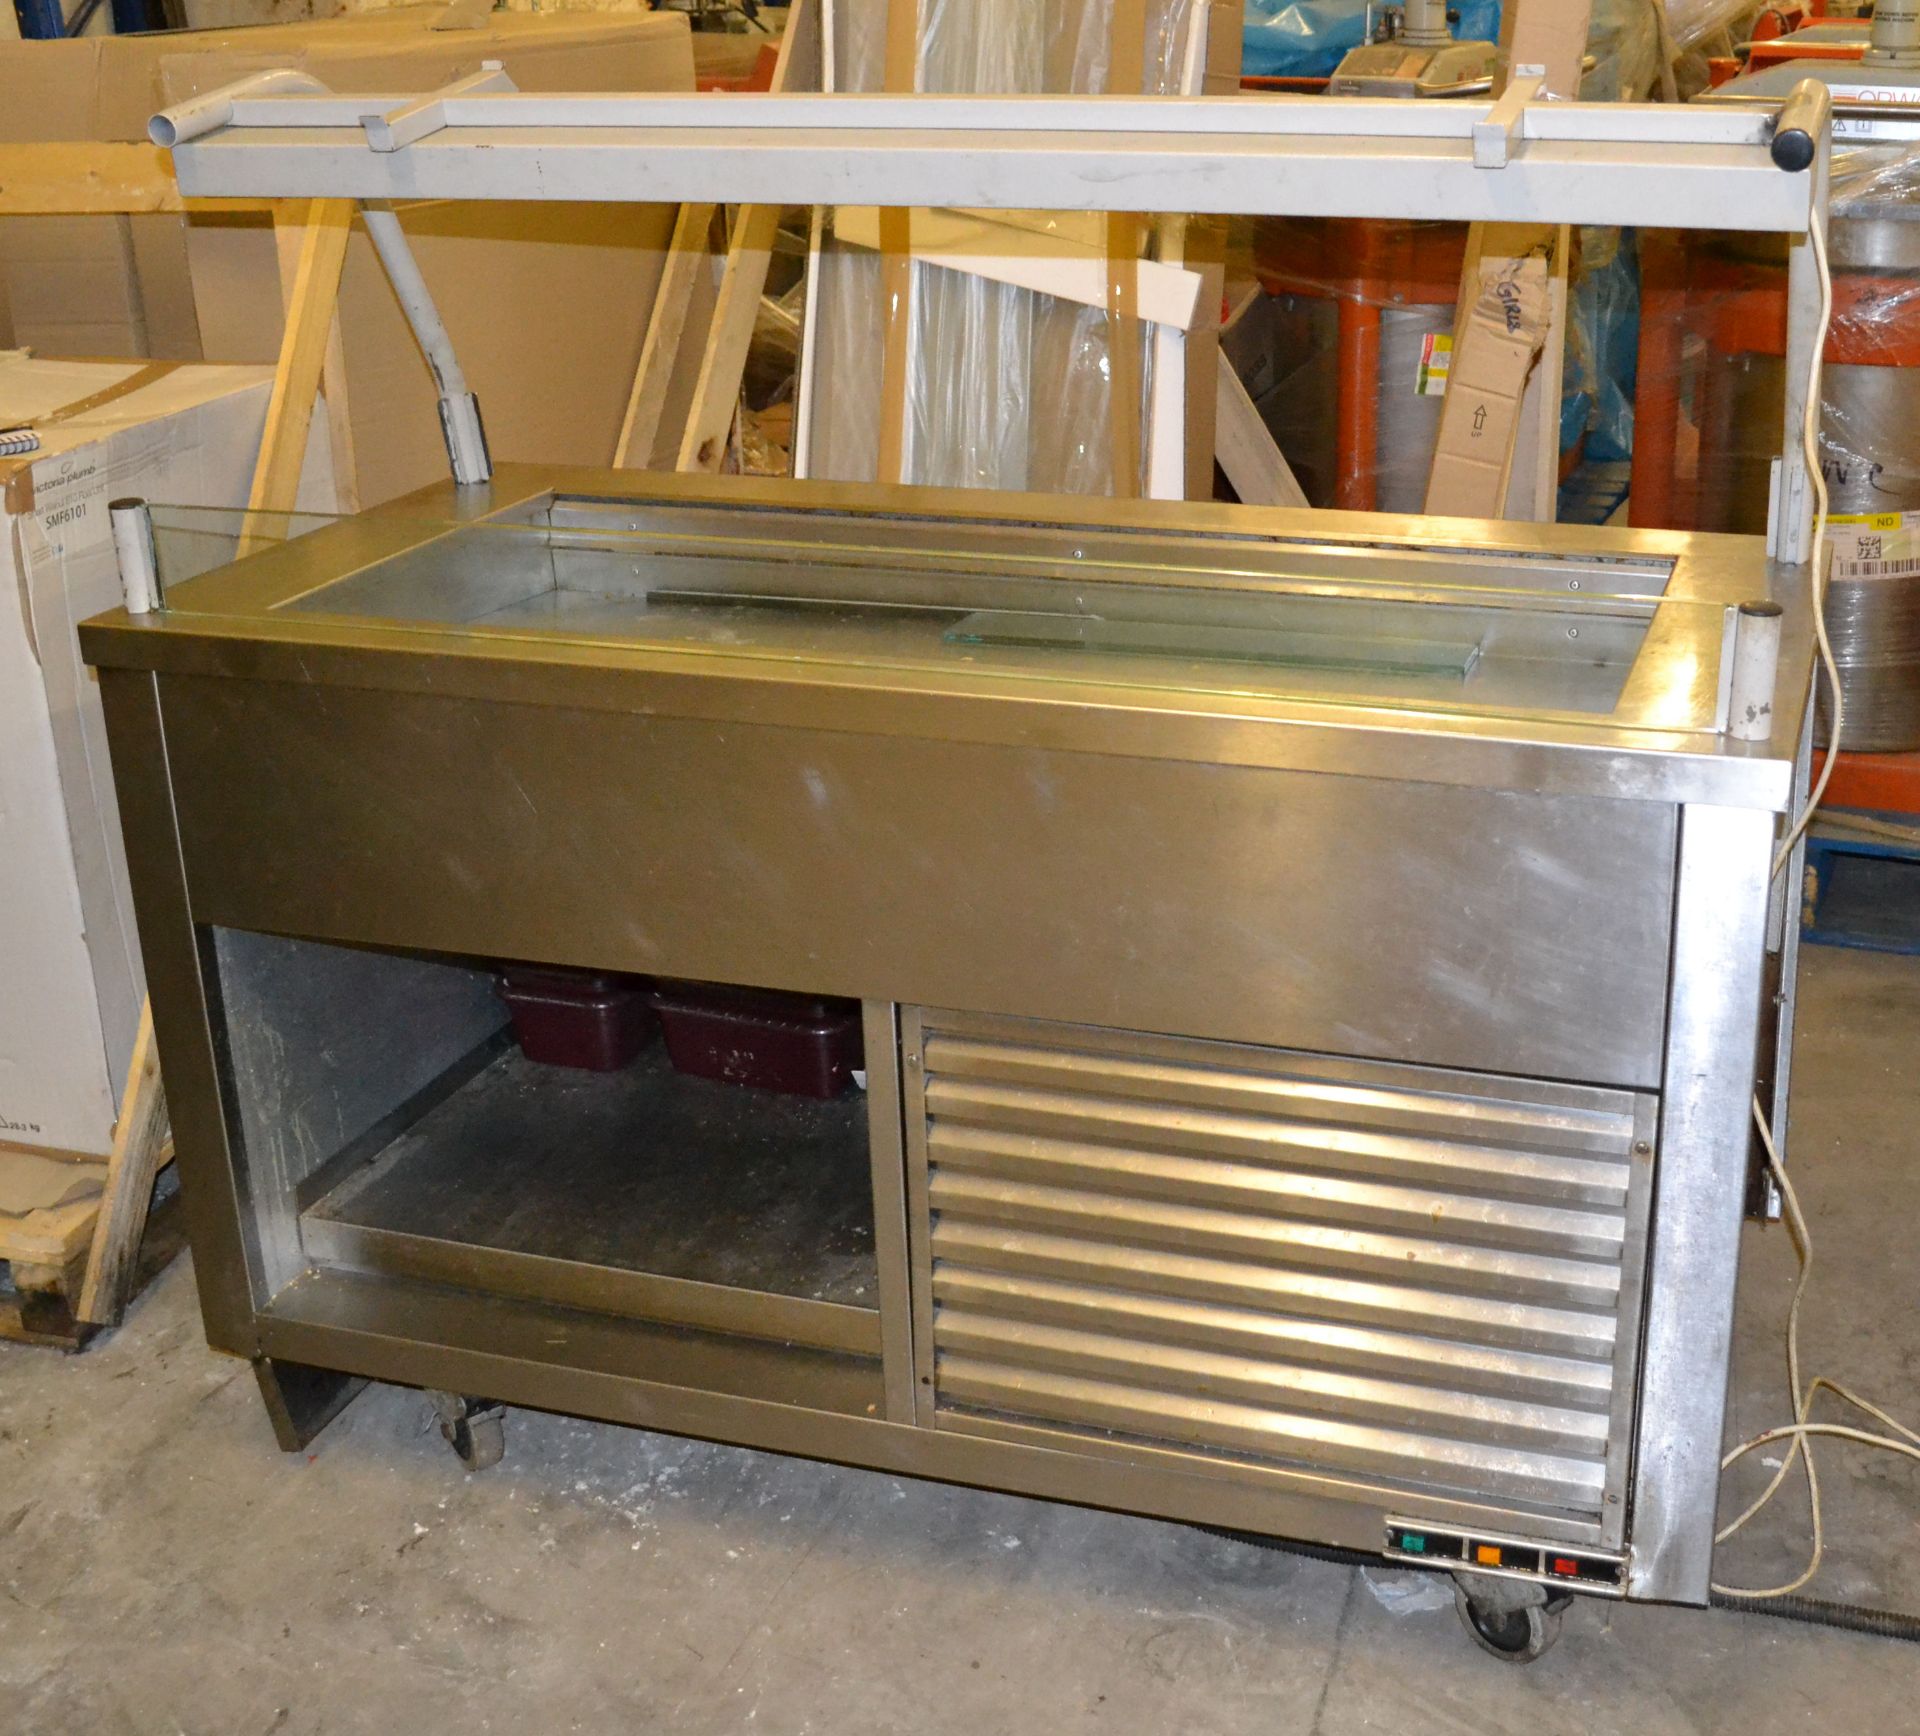 1 x Advanced Catering Equipment 1500BADW 240V Chilled Counter - Details to follow - Ref: FJC011 - - Image 2 of 10